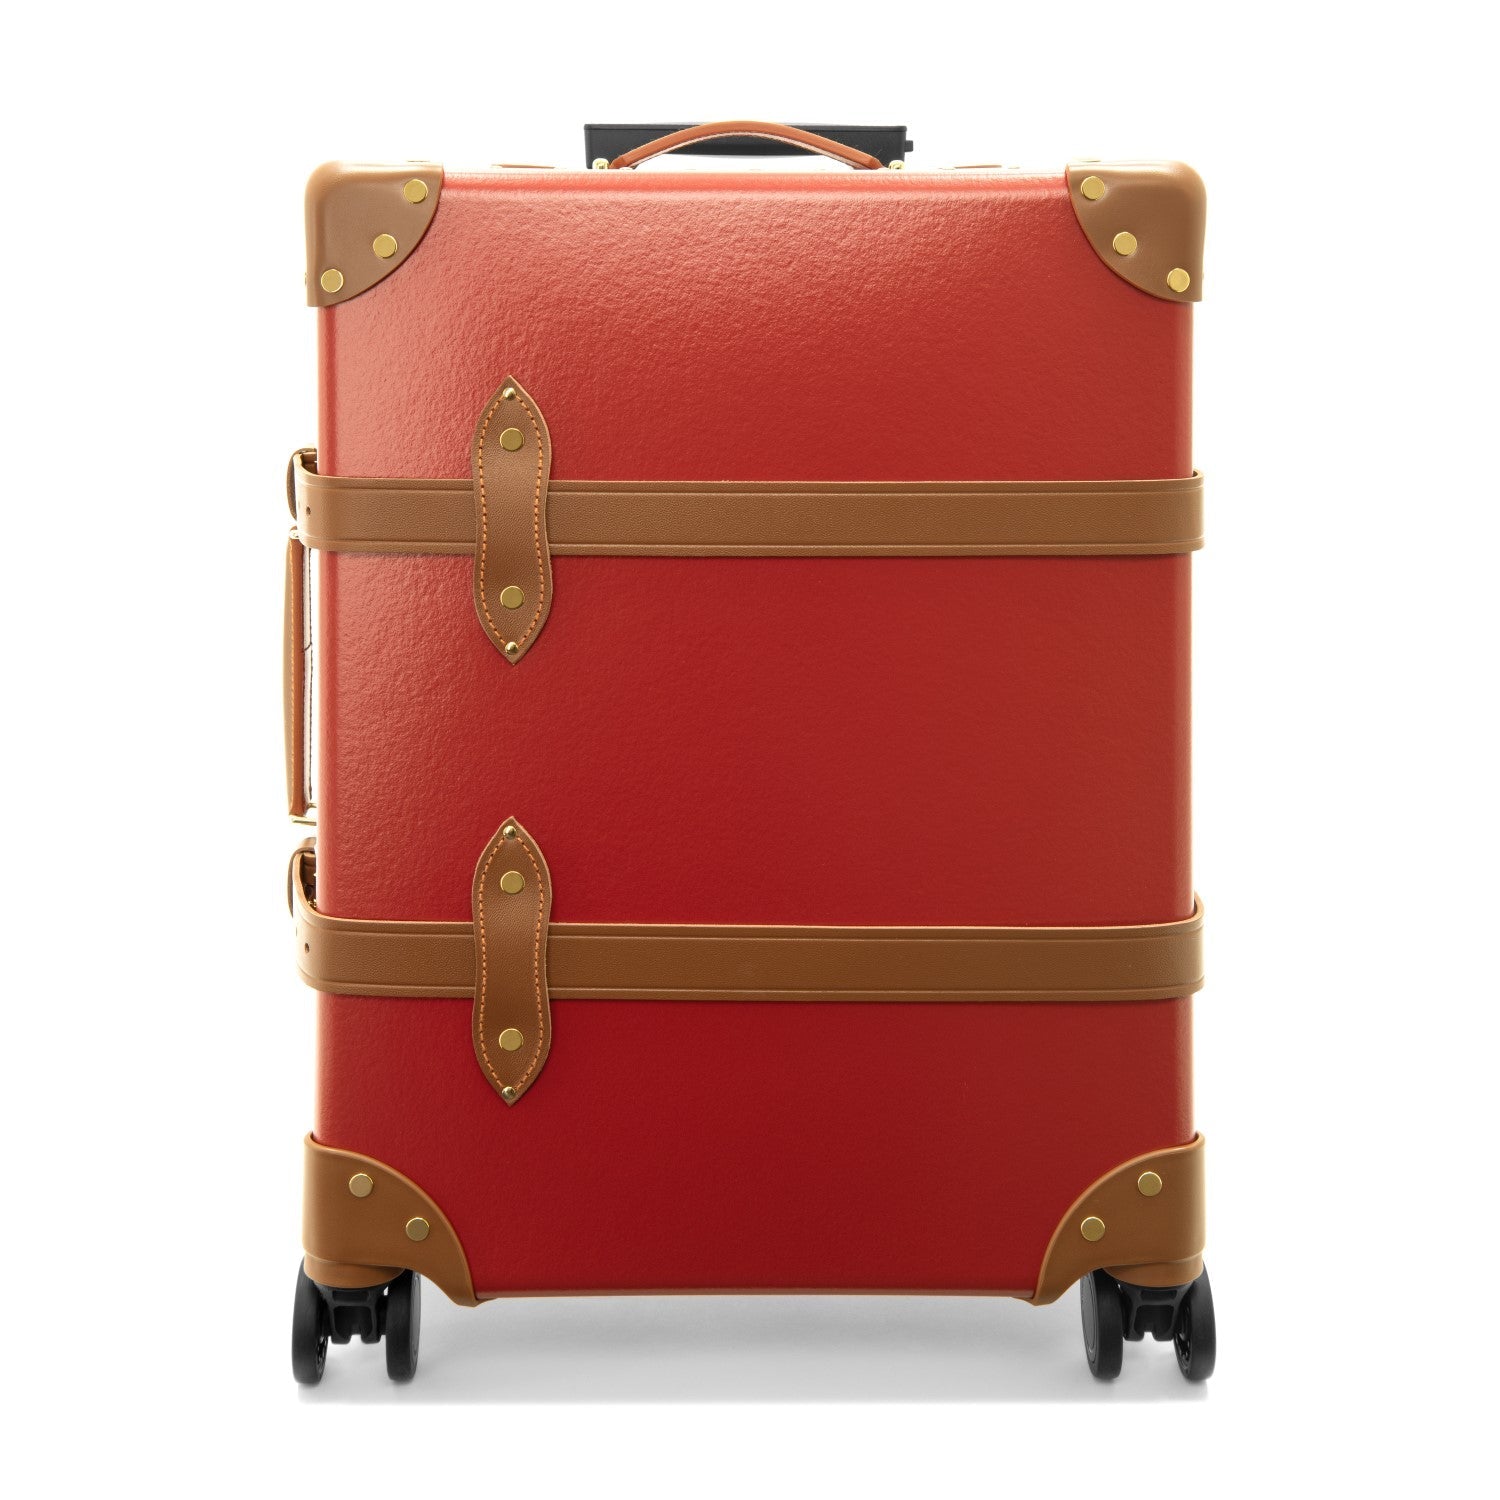 Centenary · Carry-On - 4 Wheels | Red/Caramel/Gold